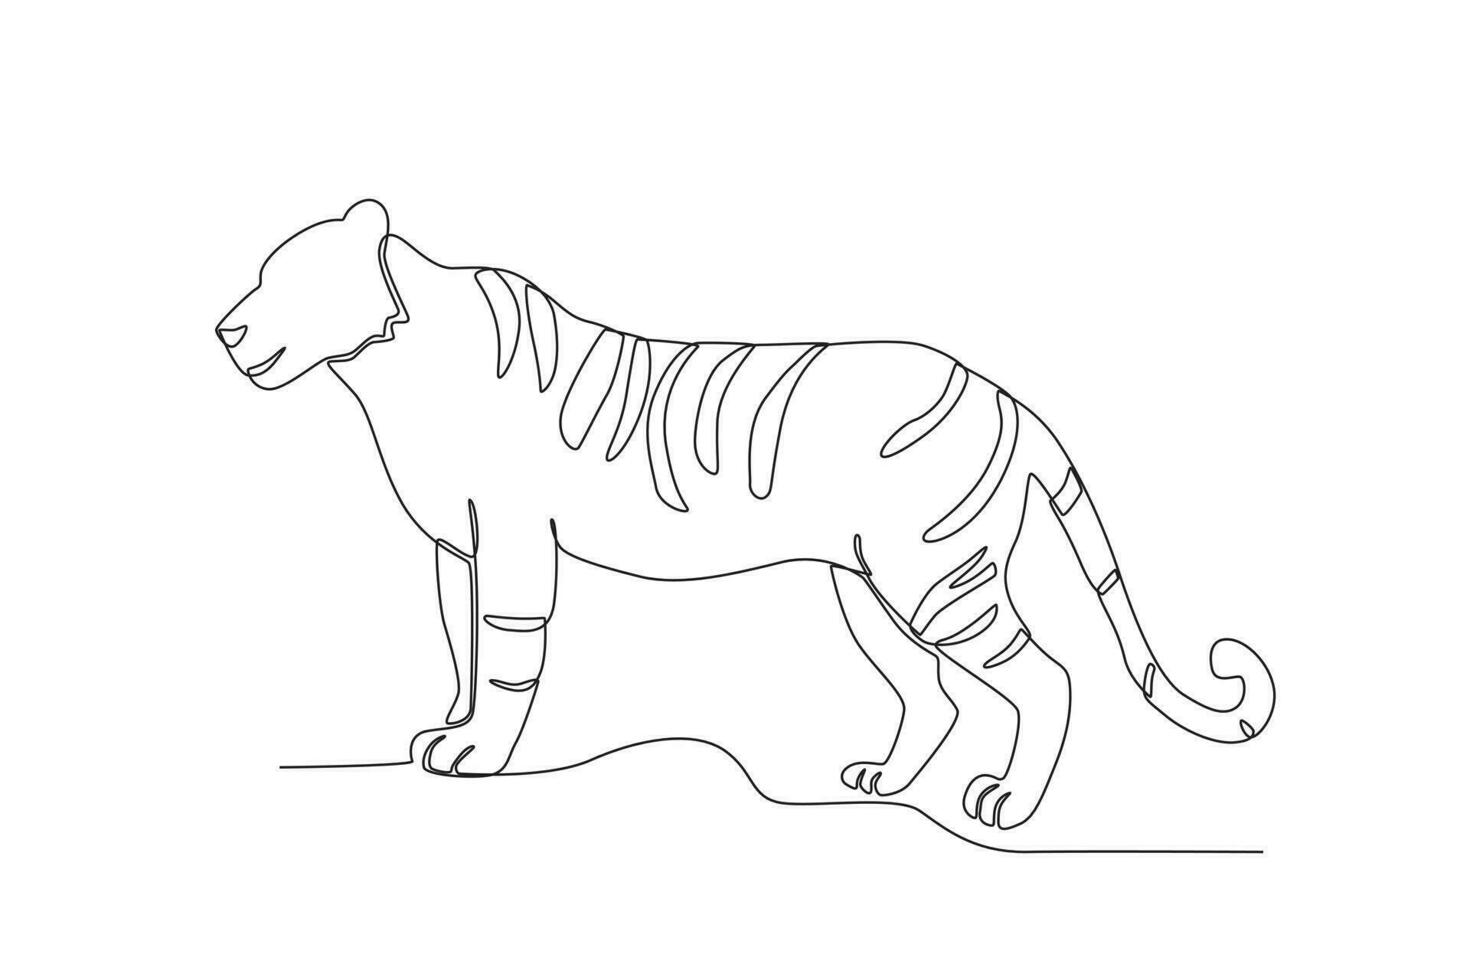 Single one line drawing of a tiger. Continuous line draw design graphic vector illustration.